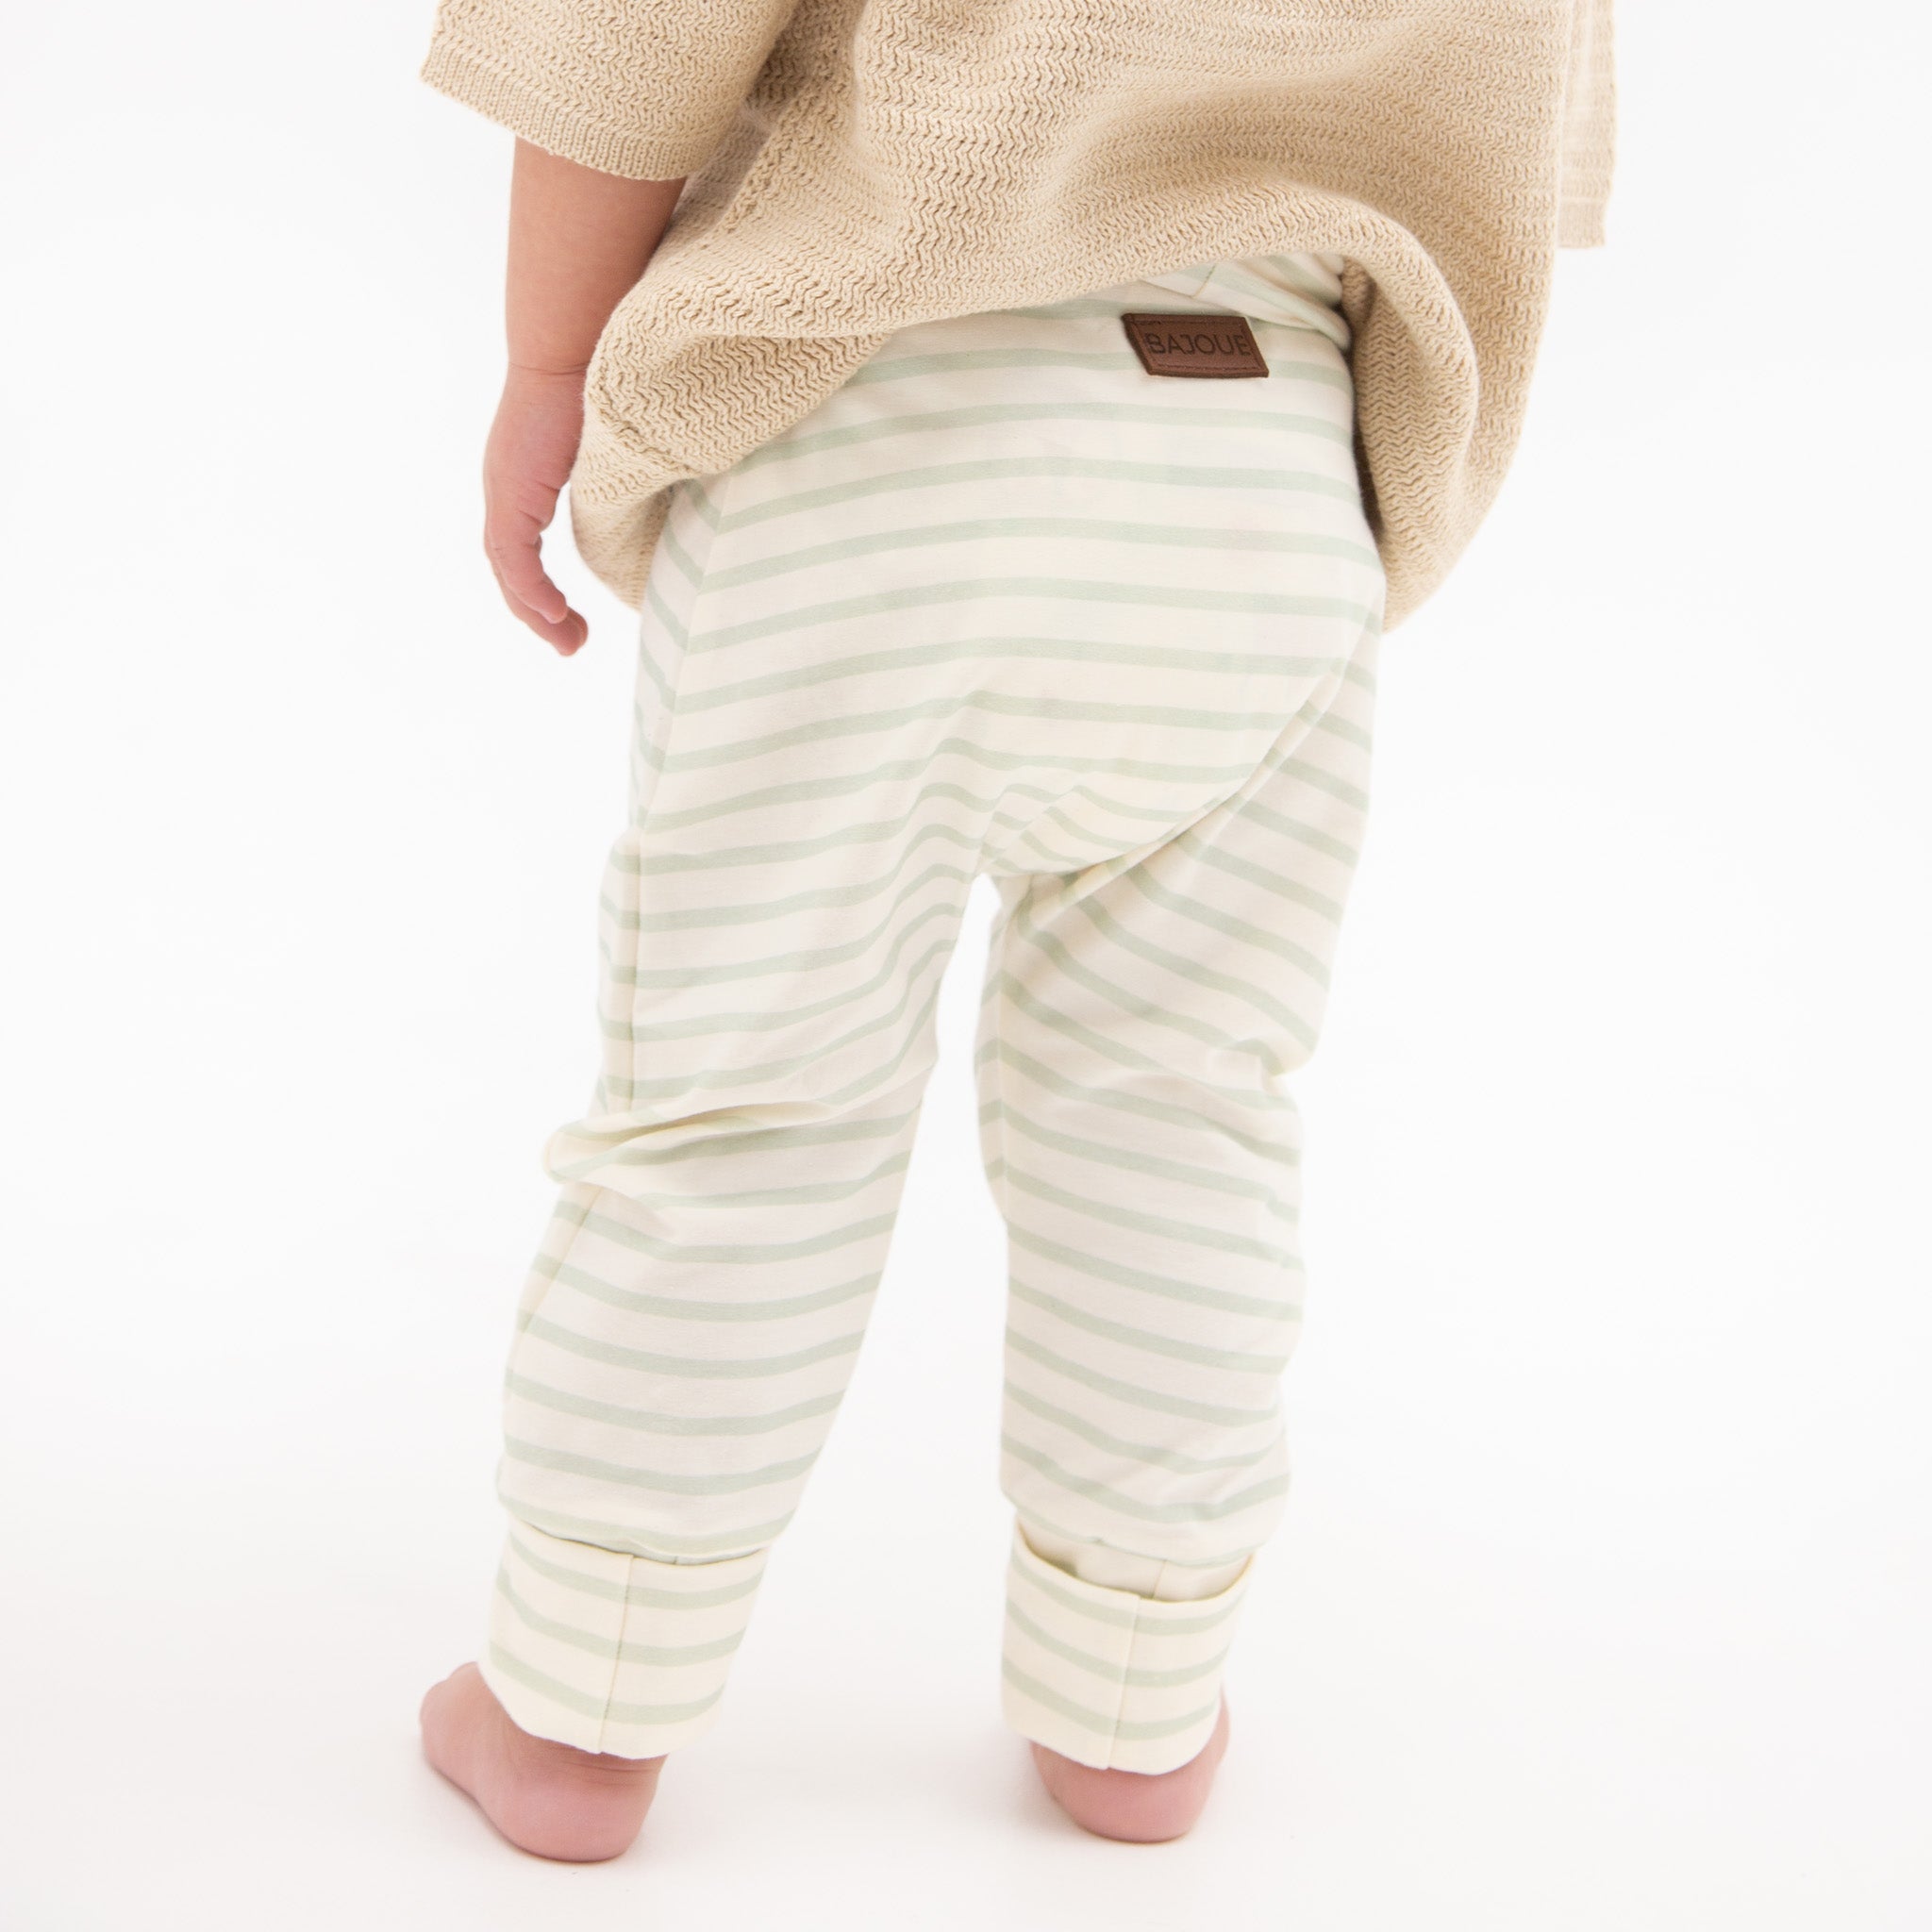 Grow with me babies and children Pants - Striped